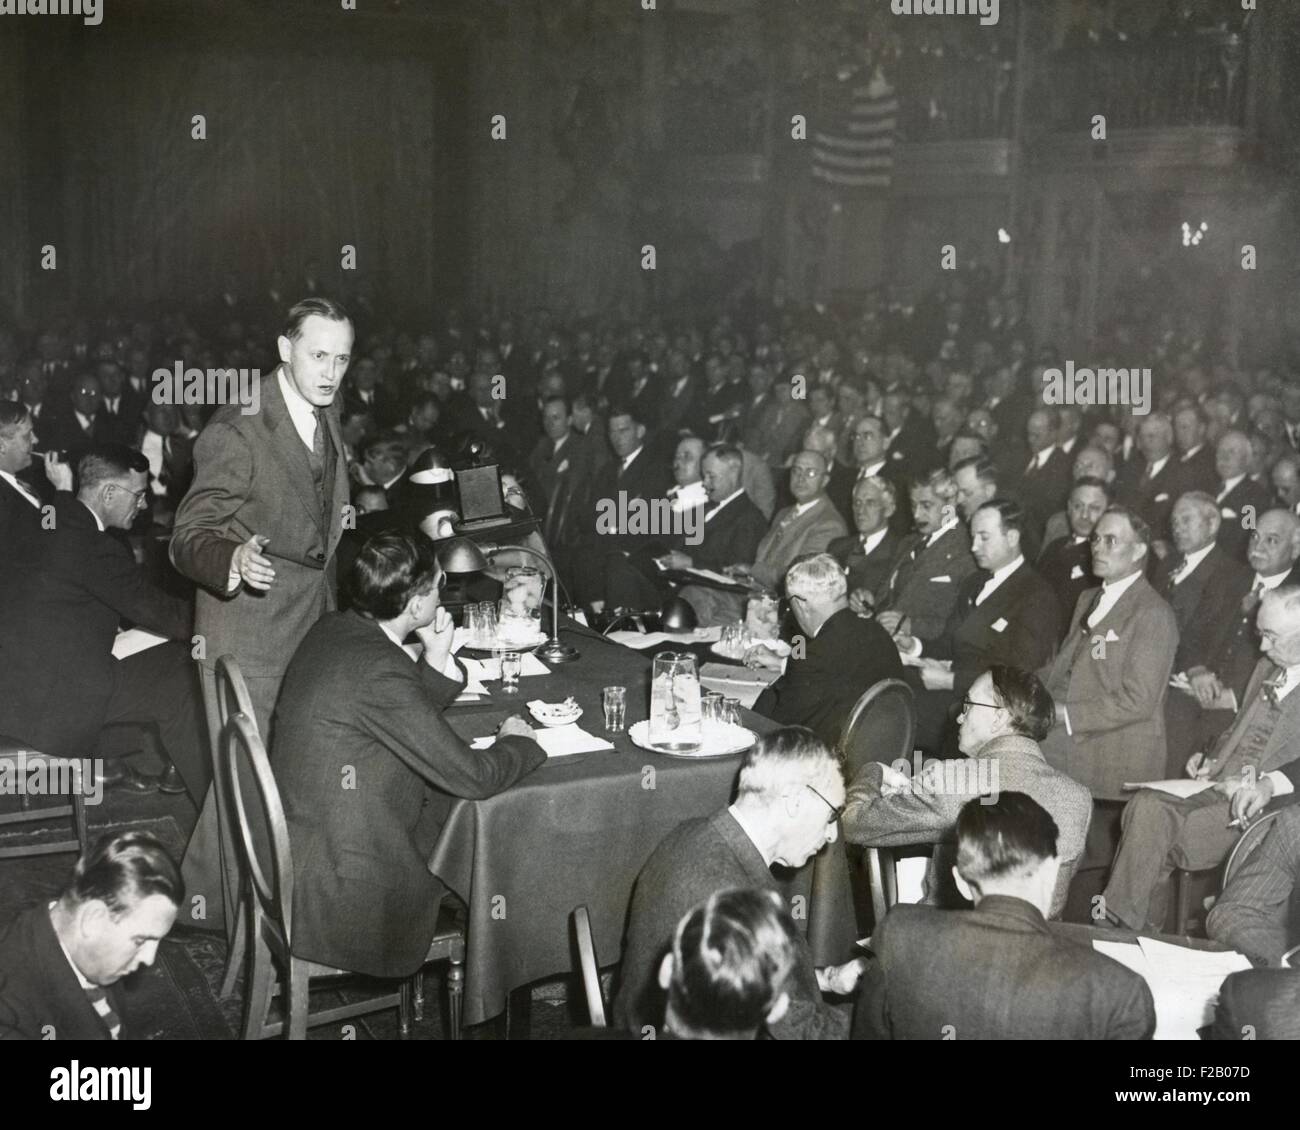 Harry Hopkins urged the greatest speed in starting civil works projects to employ 4 million men. Dec. 15, 1933. He addressed the Civil Works Administration Conference, attended by more than 500 governors, mayors and local officials on Nov. 15, 1933. (CSU 2015 9 1252) Stock Photo